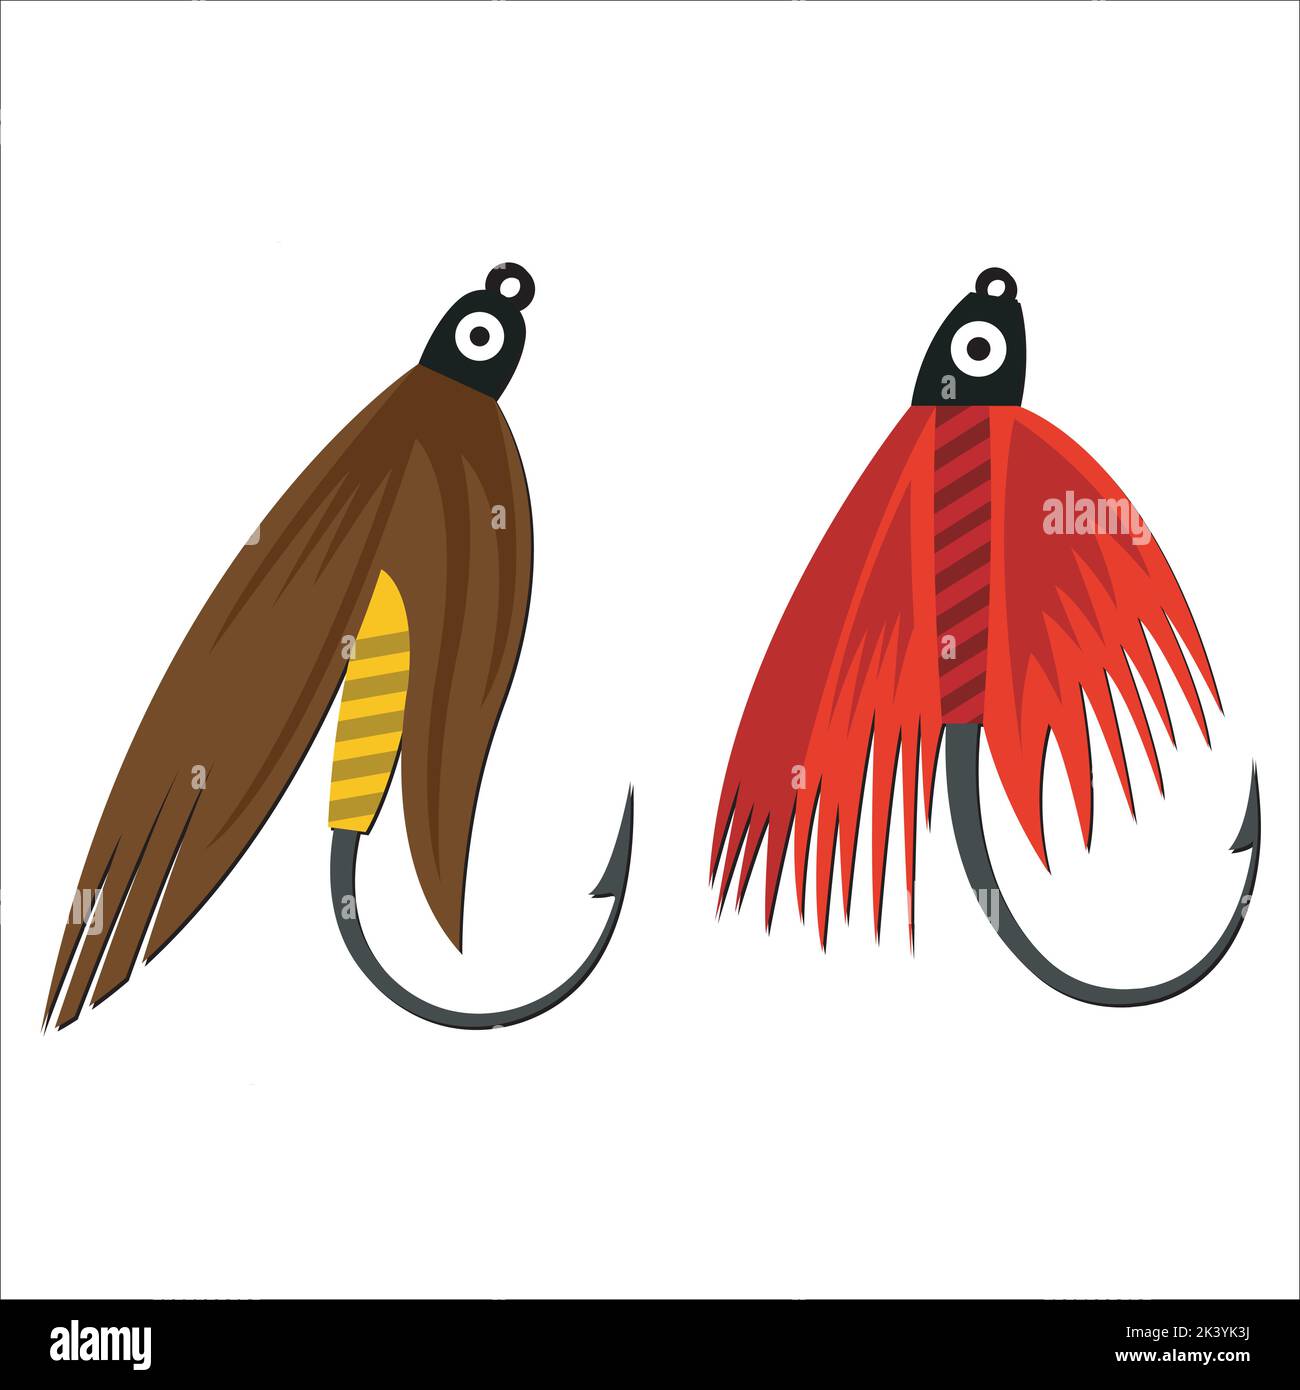 Fishing lure isolate Stock Vector Images - Alamy